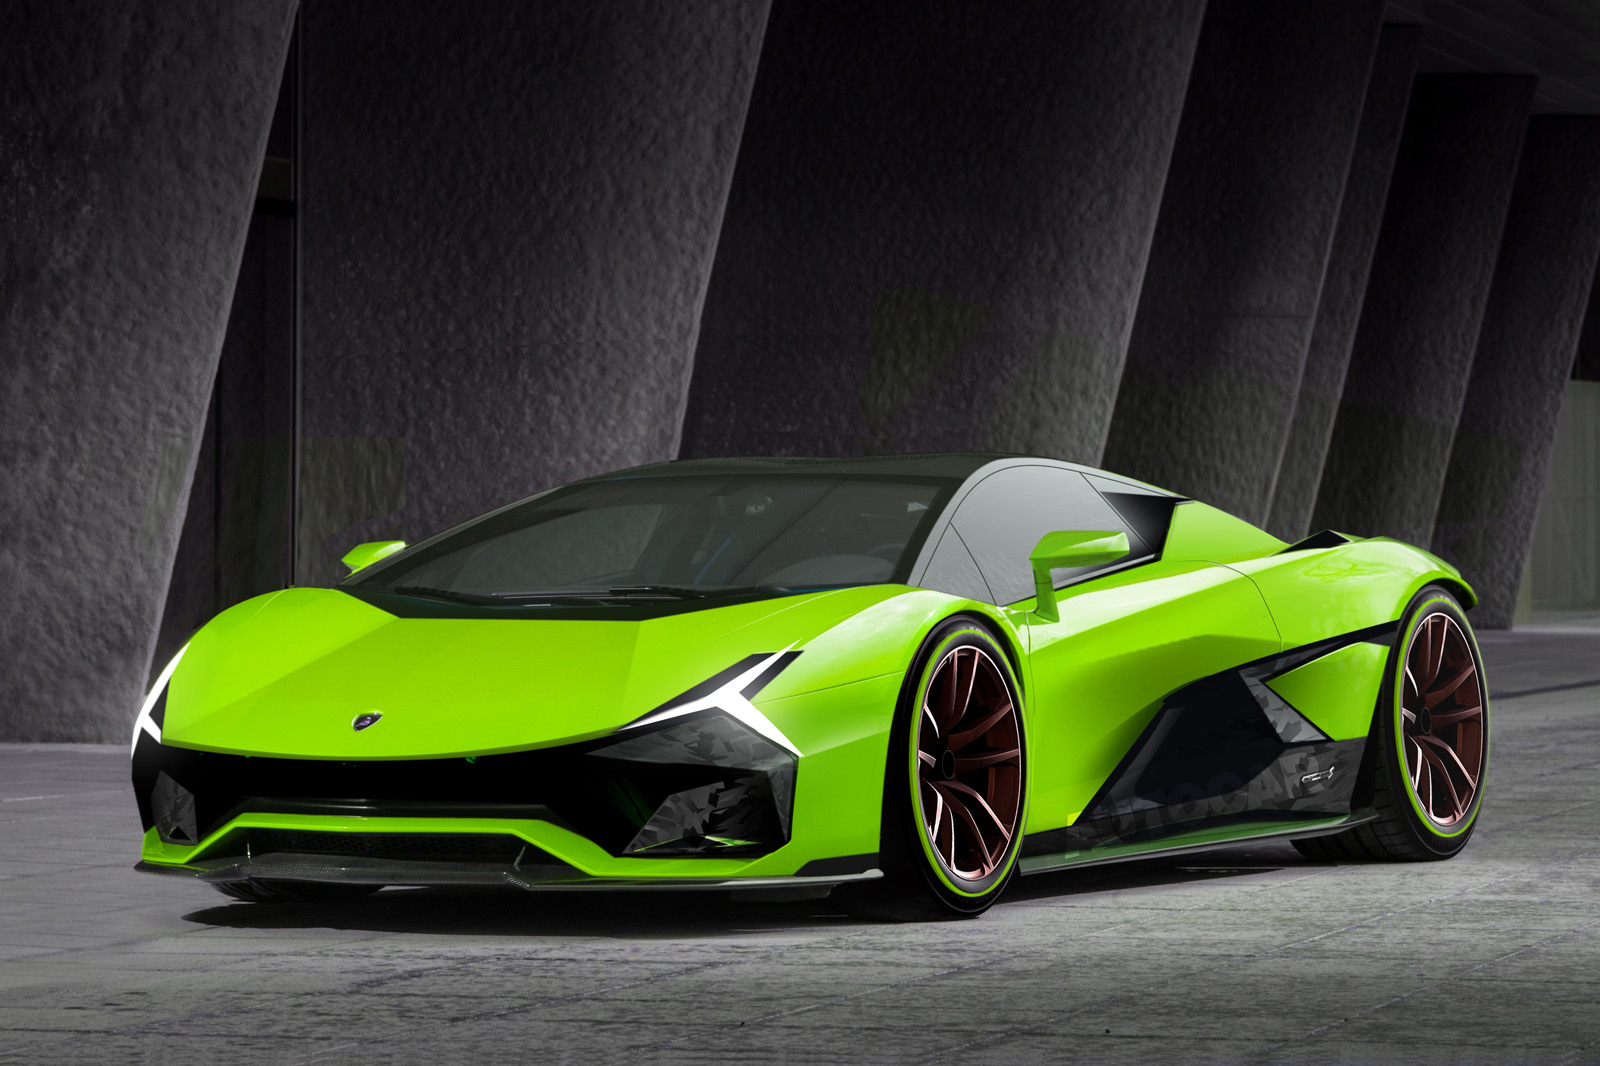 New Huracan derivative in 2022, replacement in 2023/24? Talk